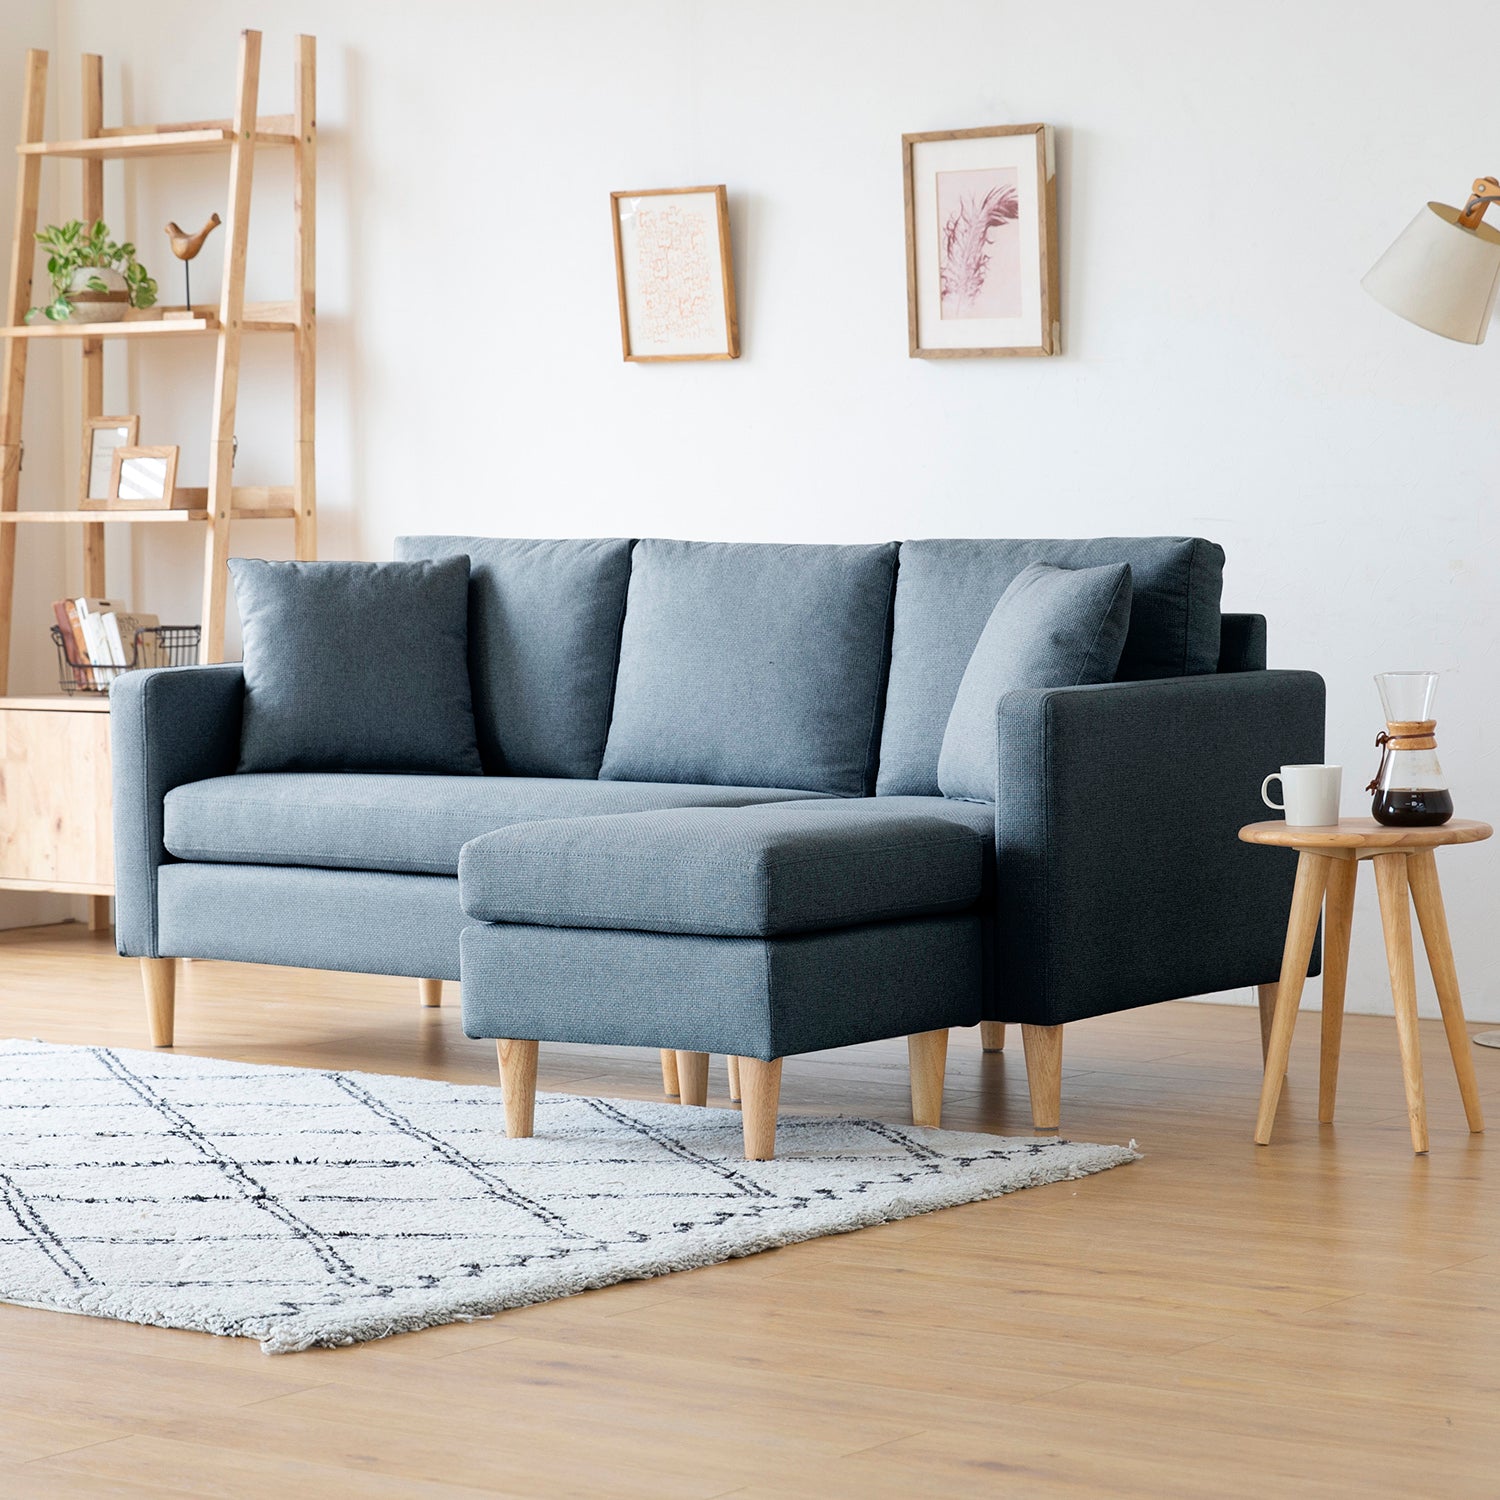 Valolam Compact Sectional